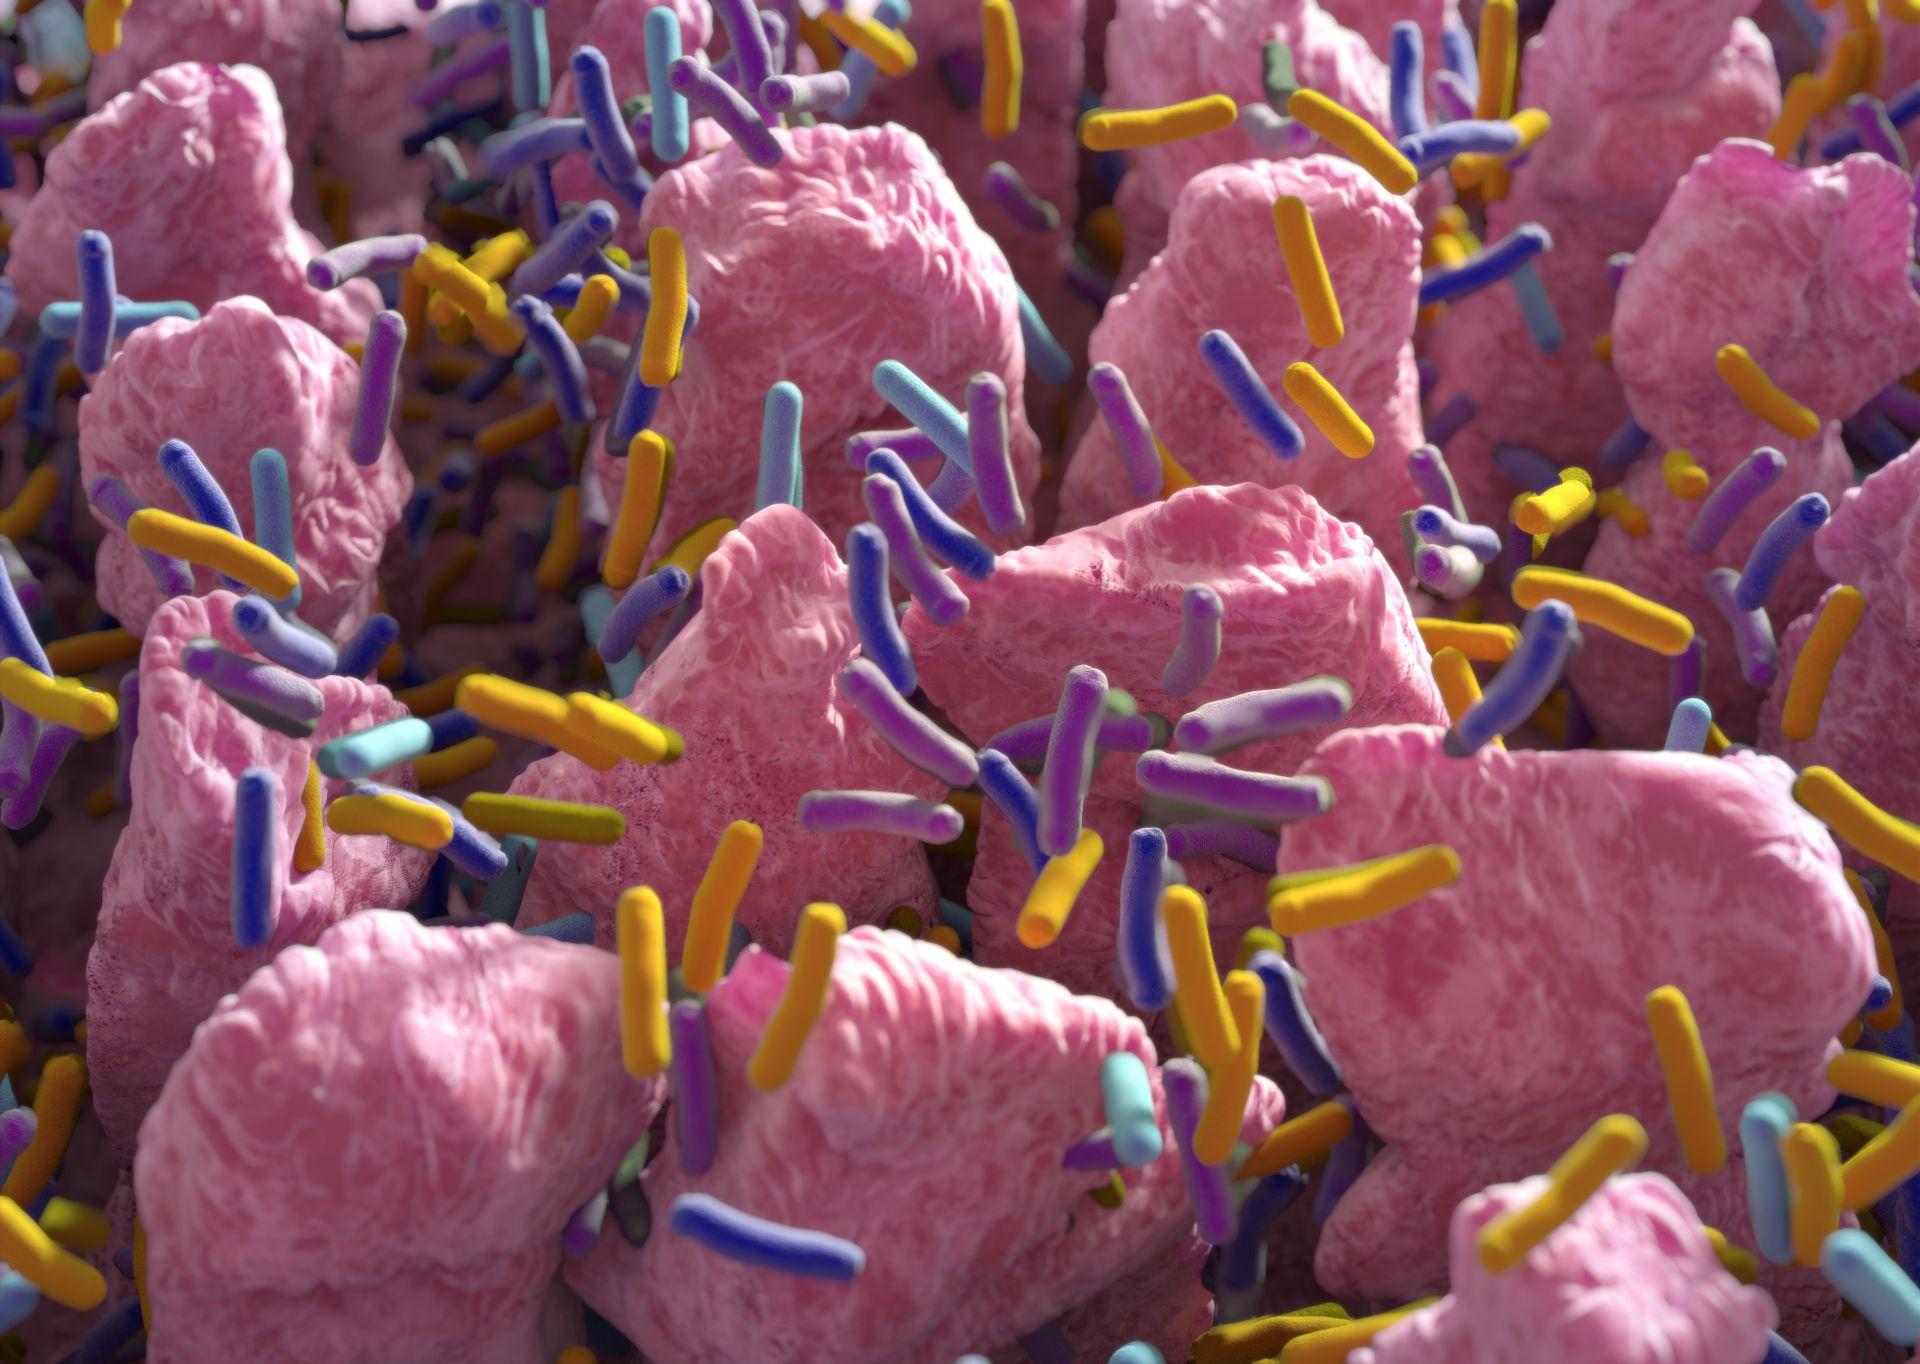 Intestinal villi. Small finger-like projections that extend into the lumen of the small intestine. Gut bacteria, flora, microbiome. 3d illustration.Intestinal villi. Small finger-like projections that extend into the lumen of the small intestine. Gut bacteria, flora, microbiome. 3d illustration.